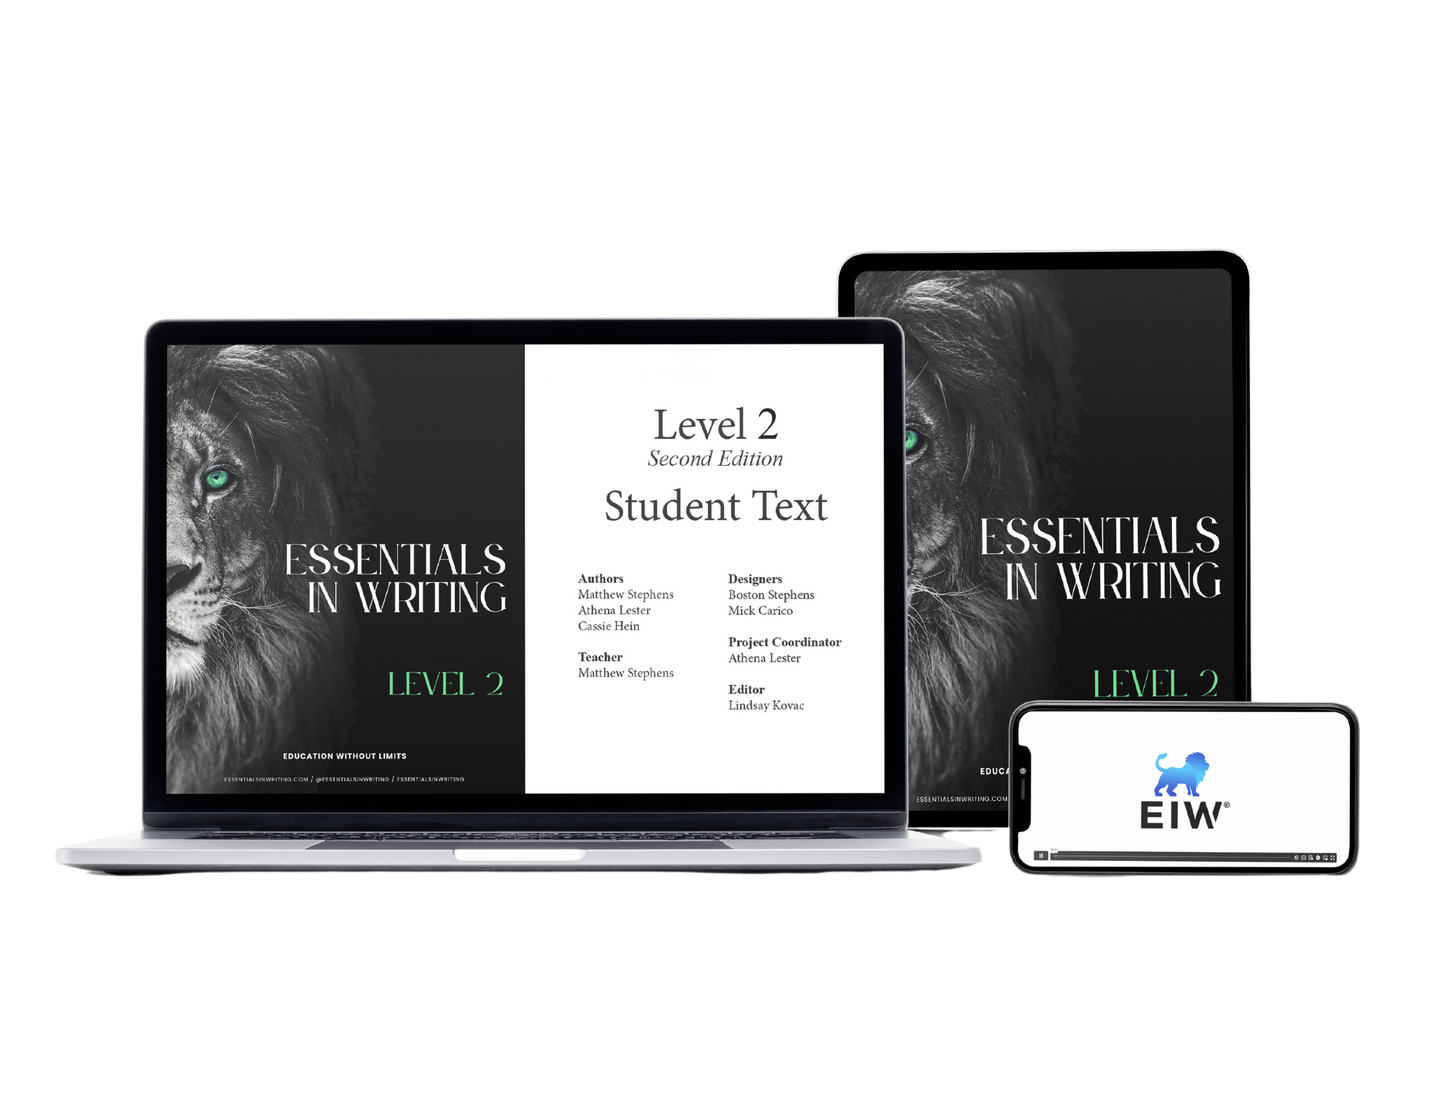 Essentials in Writing Level 2 Second Edition